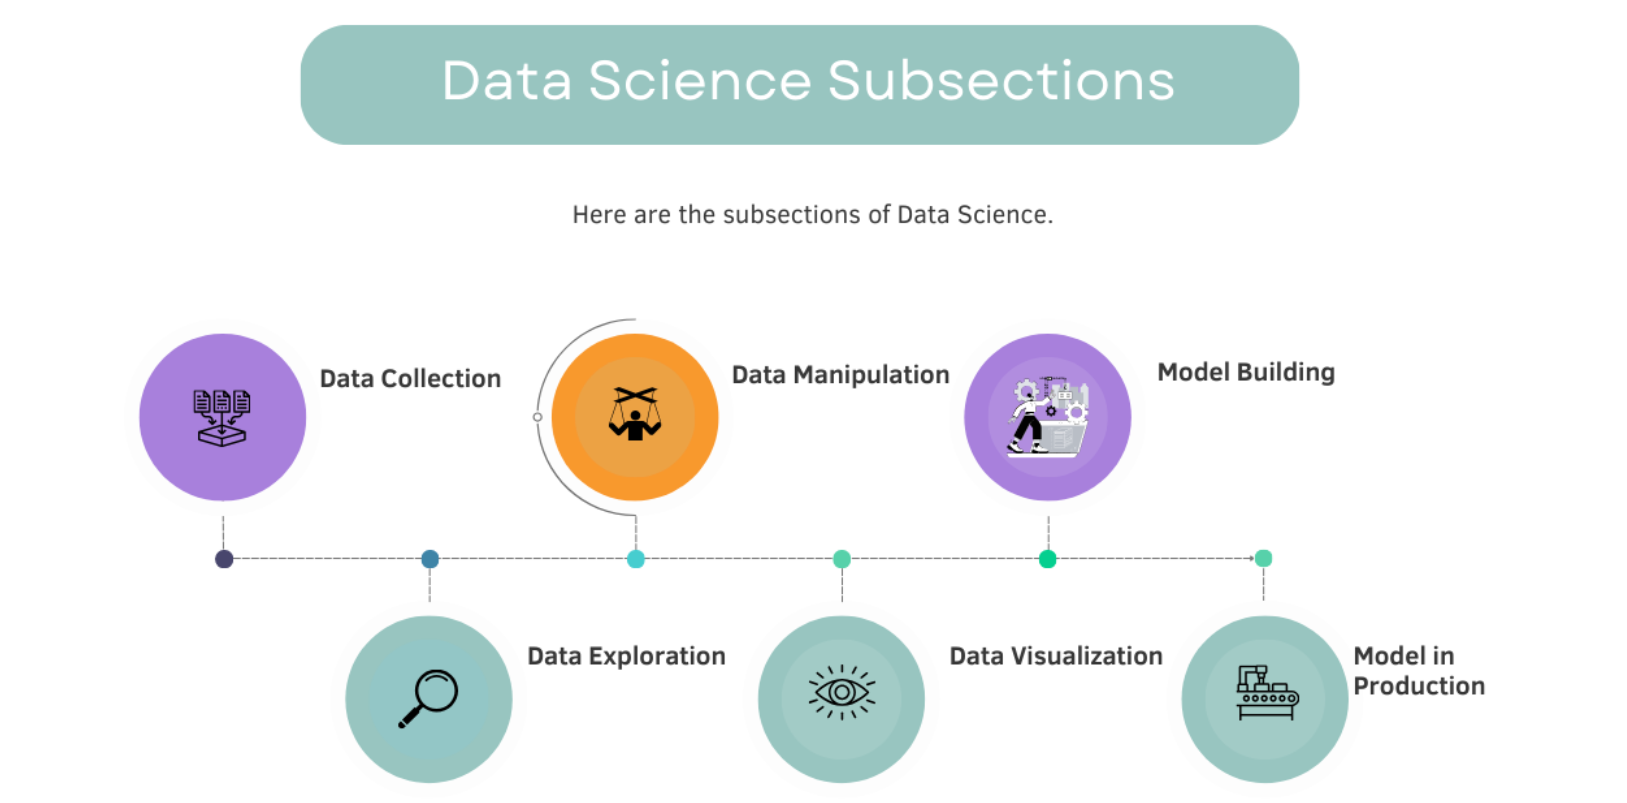 Data science subsections